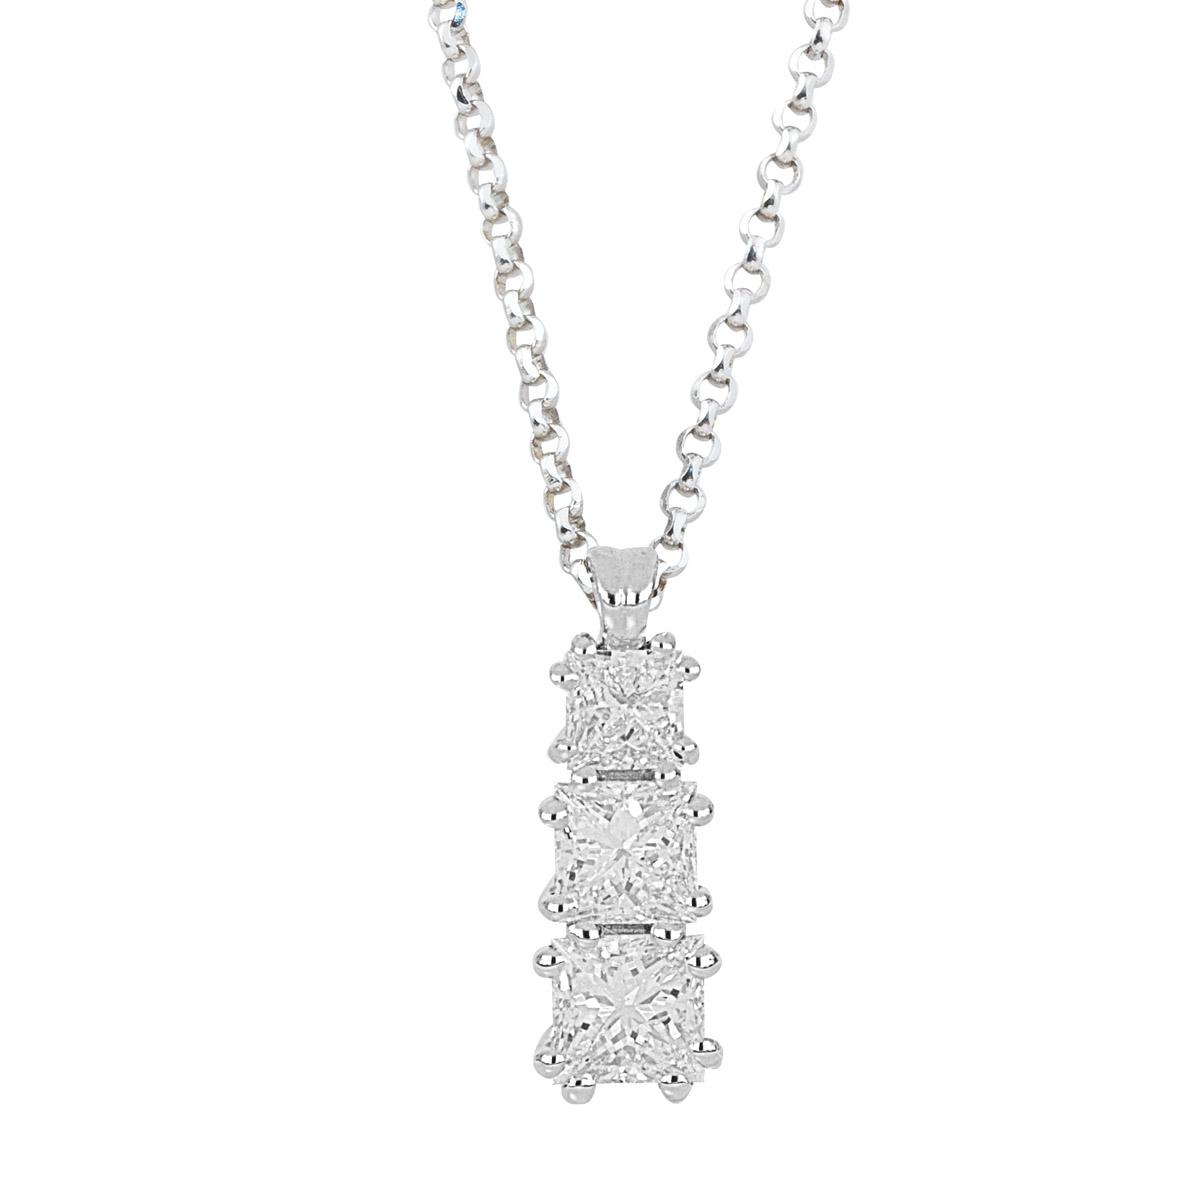 18kt white gold rhodium-plated trilogy necklace with princess cut diamonds - CD607-LB